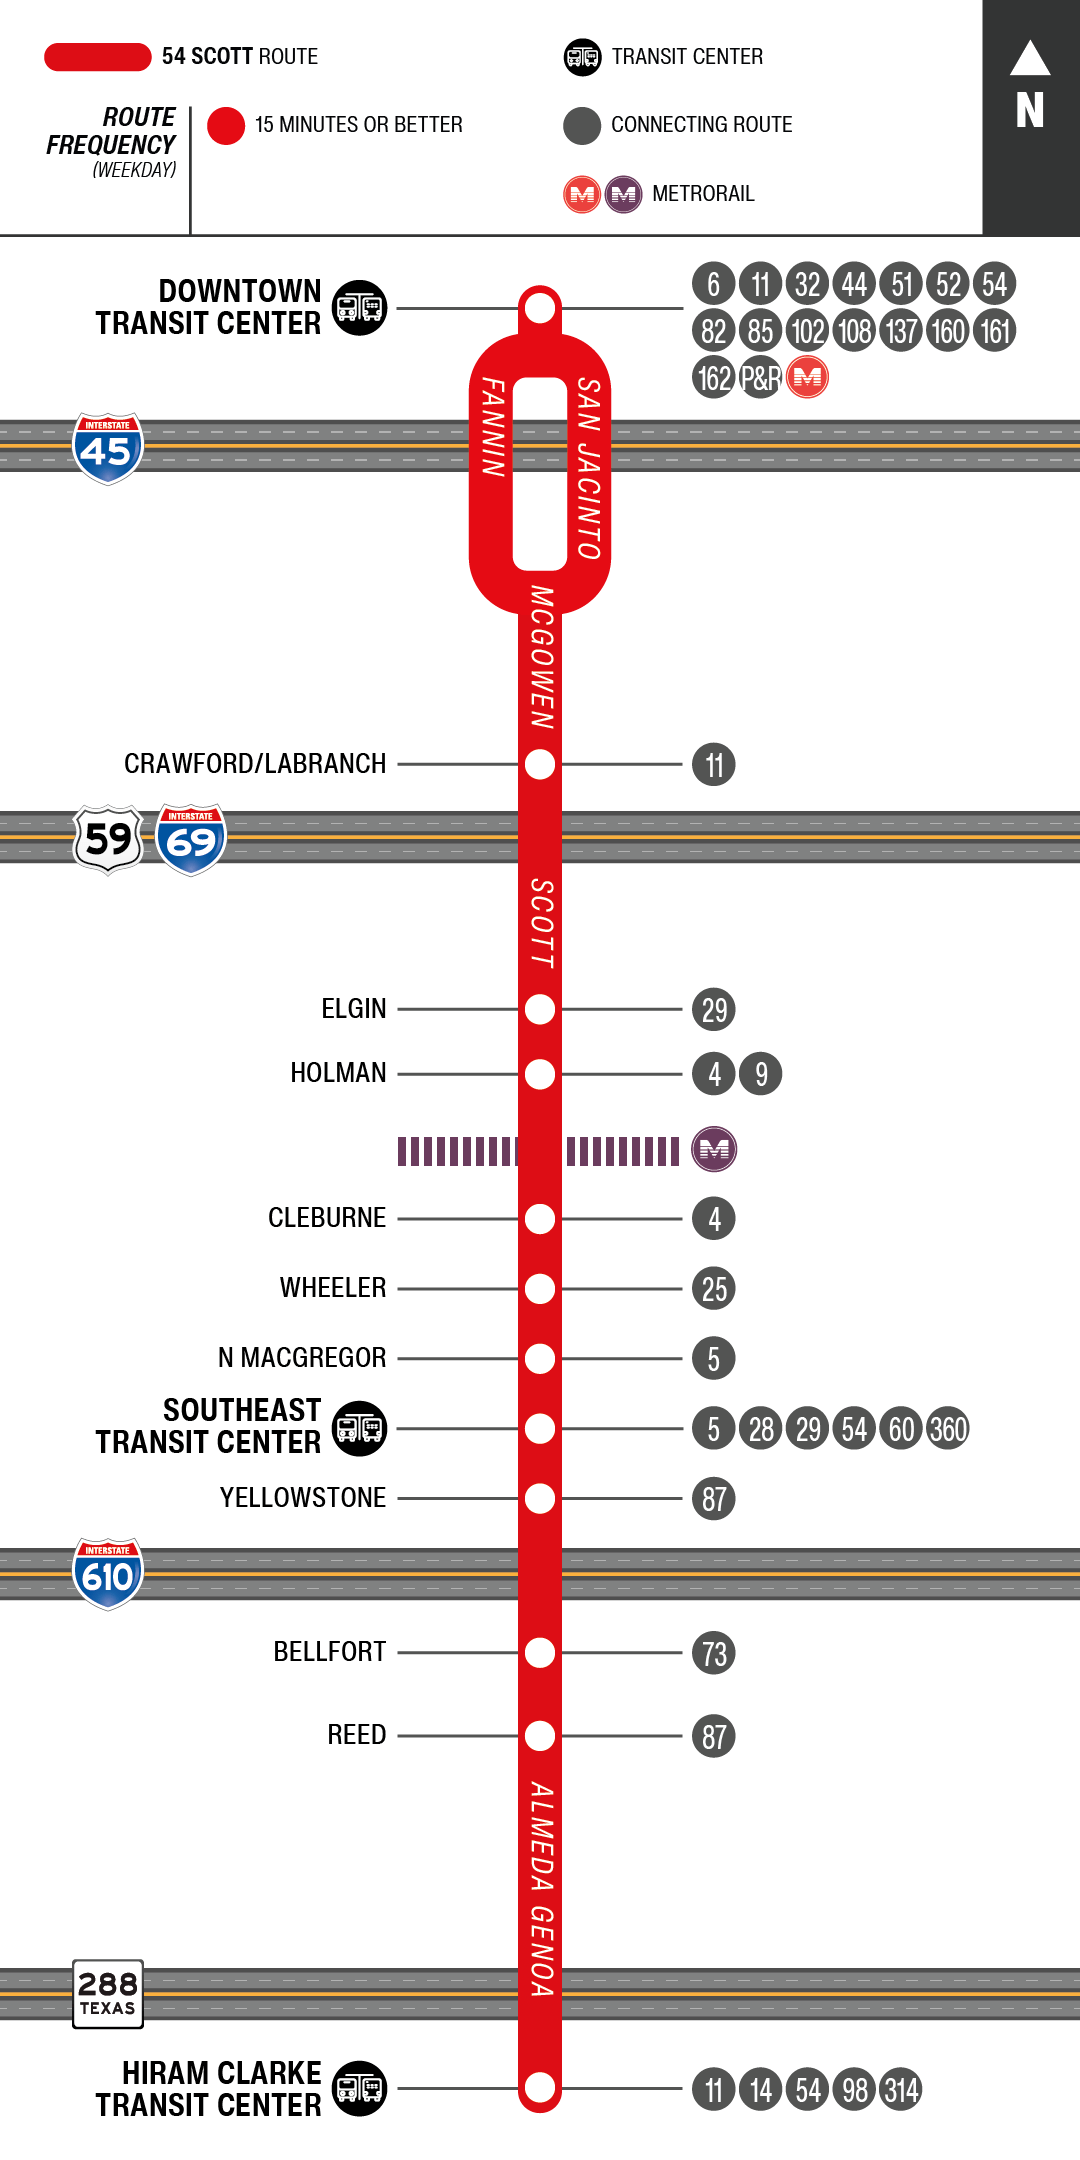 Route map for 54 Scott bus